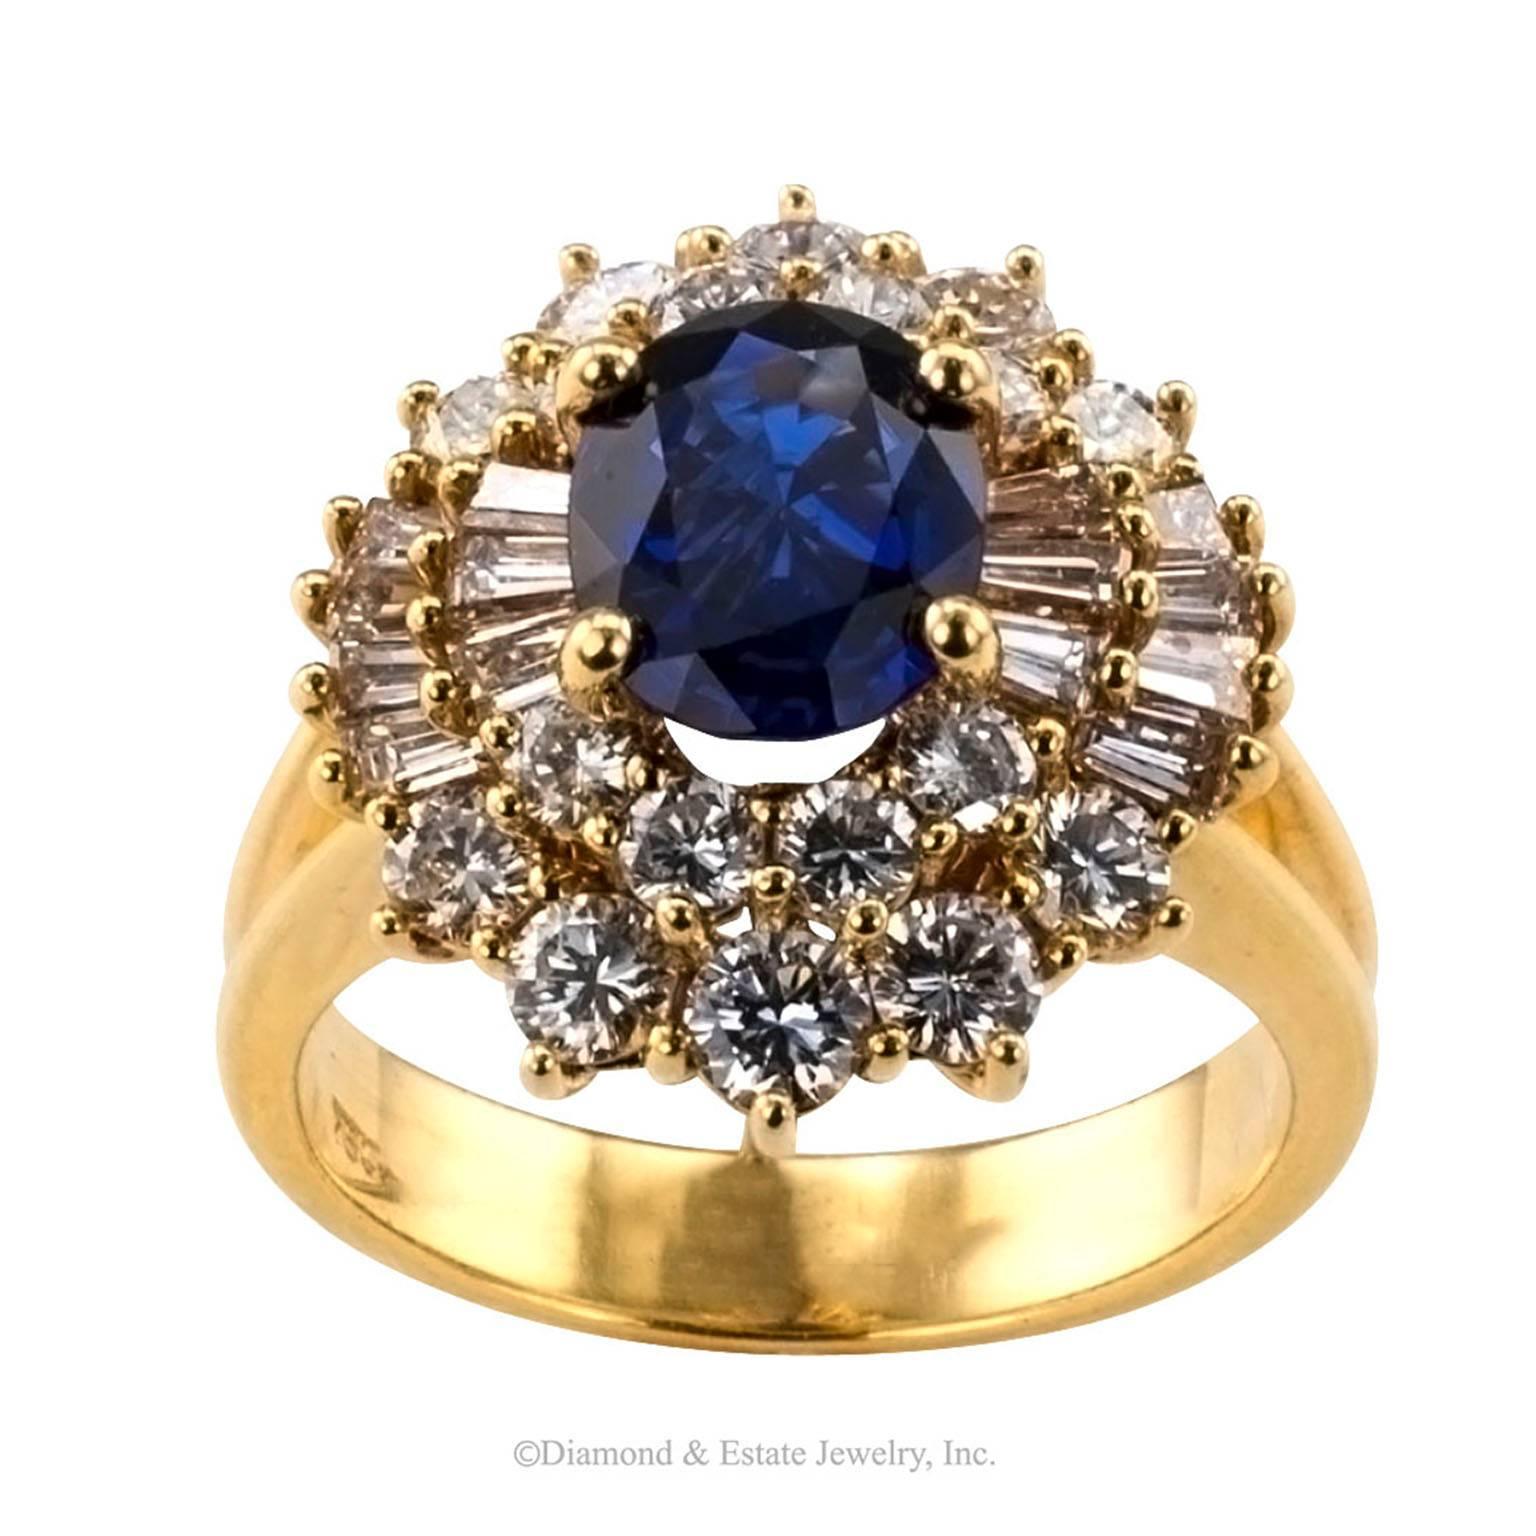 Diamond Sapphire Gold Cluster Ring

Estate 1970s sapphire and diamond cluster ring mounted in 18-karat yellow gold.  A classic design very typical of the period when it was made, but characterized a timeless aesthetic.  Showcasing a royal-blue oval